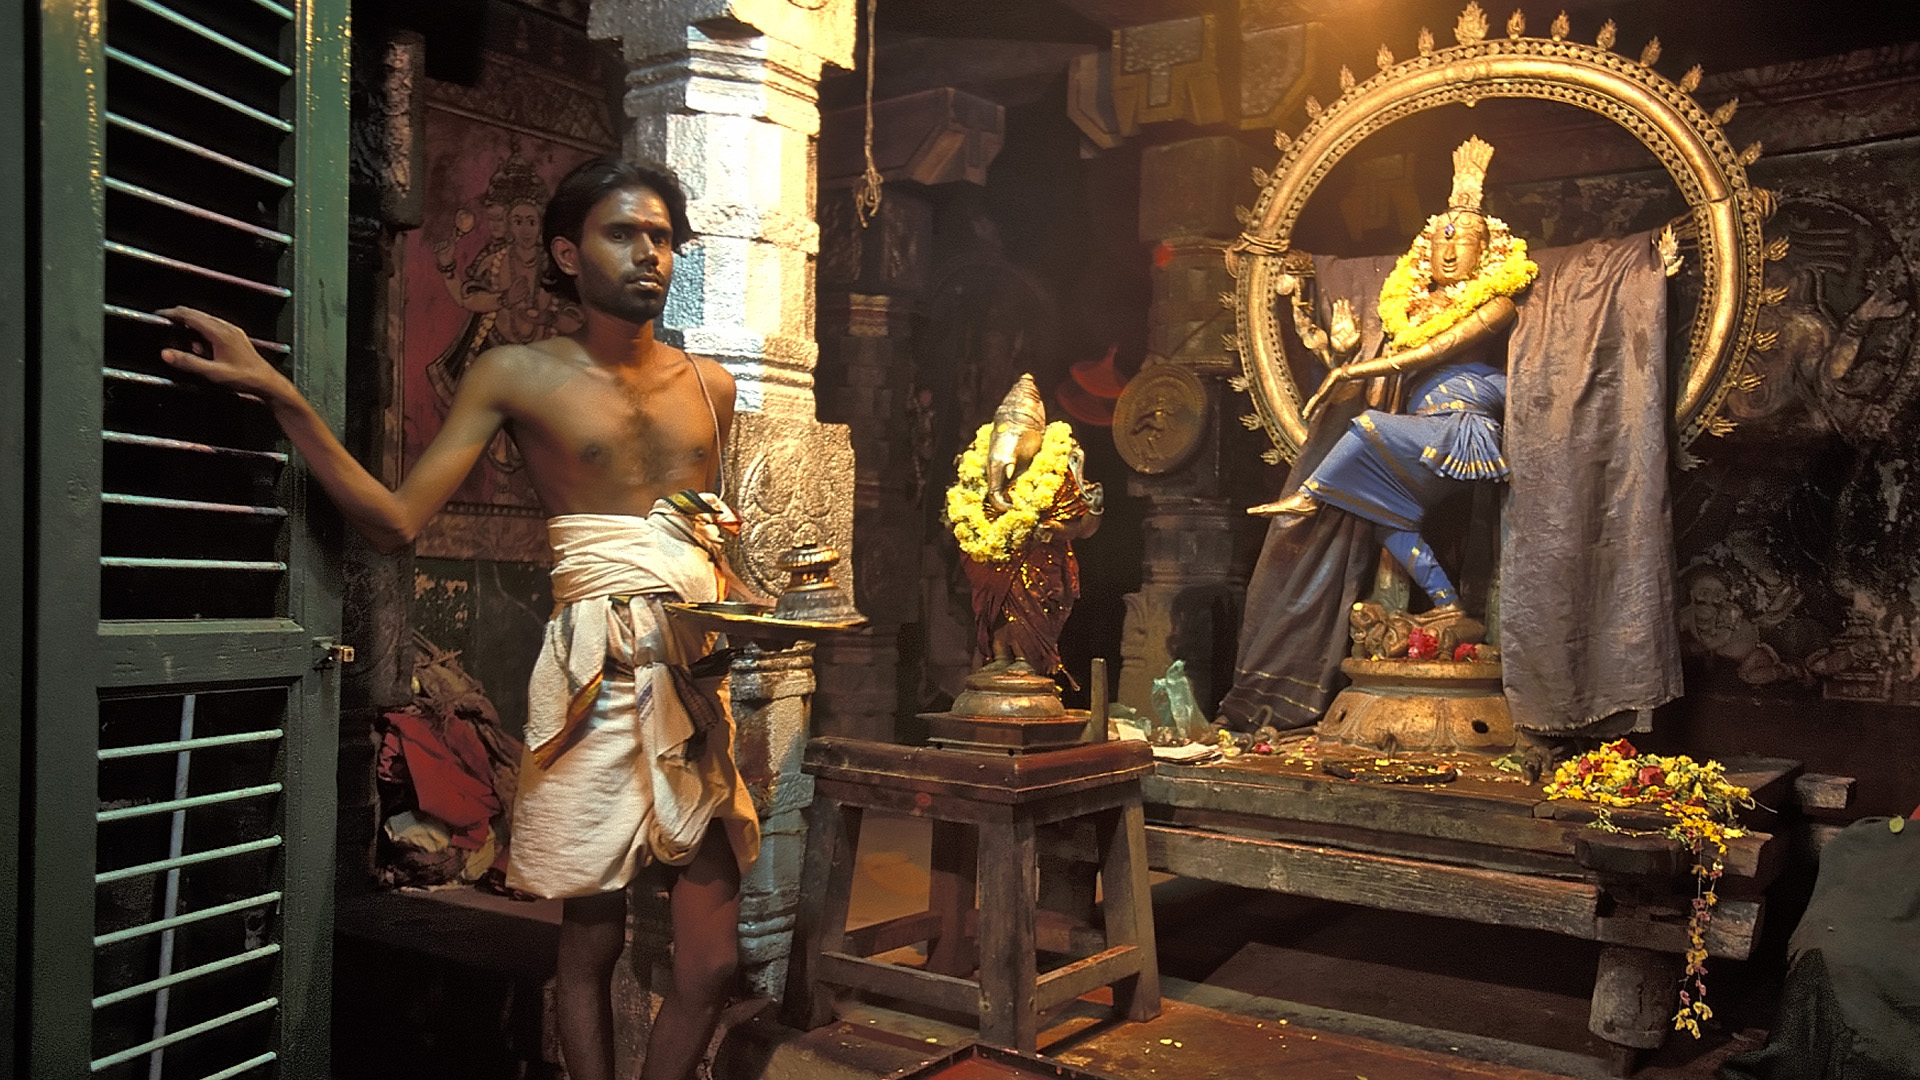 Exploring the Arts & Artisans of South India